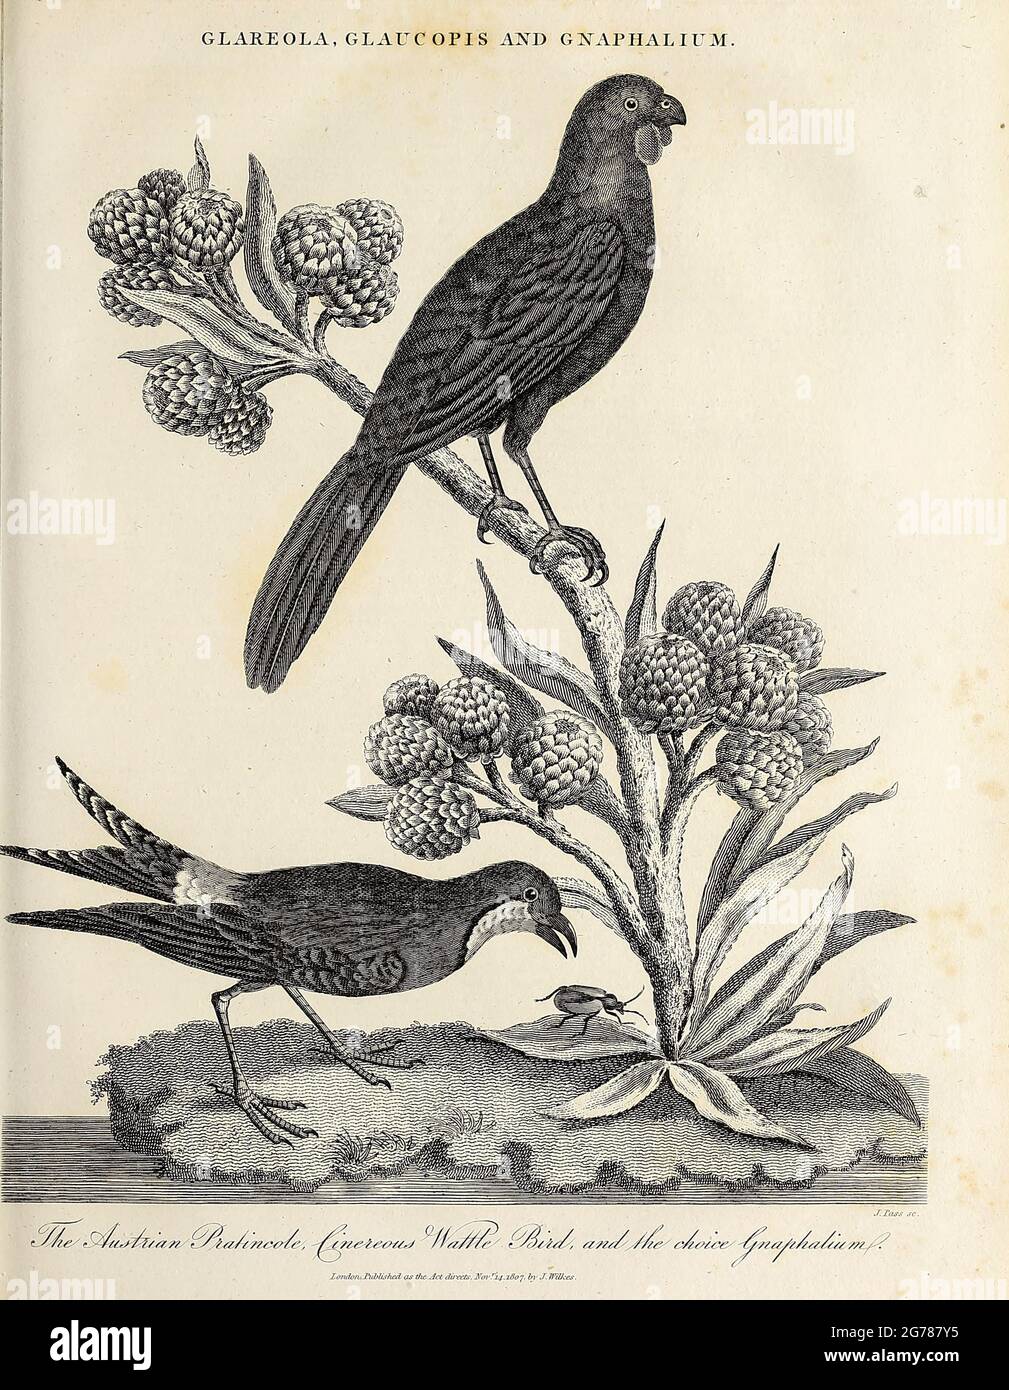 Glareola (Australian pratincole), Galaucopis (Insect) and Gnaphalium (cudweeds). Copperplate engraving From the Encyclopaedia Londinensis or, Universal dictionary of arts, sciences, and literature; Volume VIII;  Edited by Wilkes, John. Published in London in 1810. Stock Photo